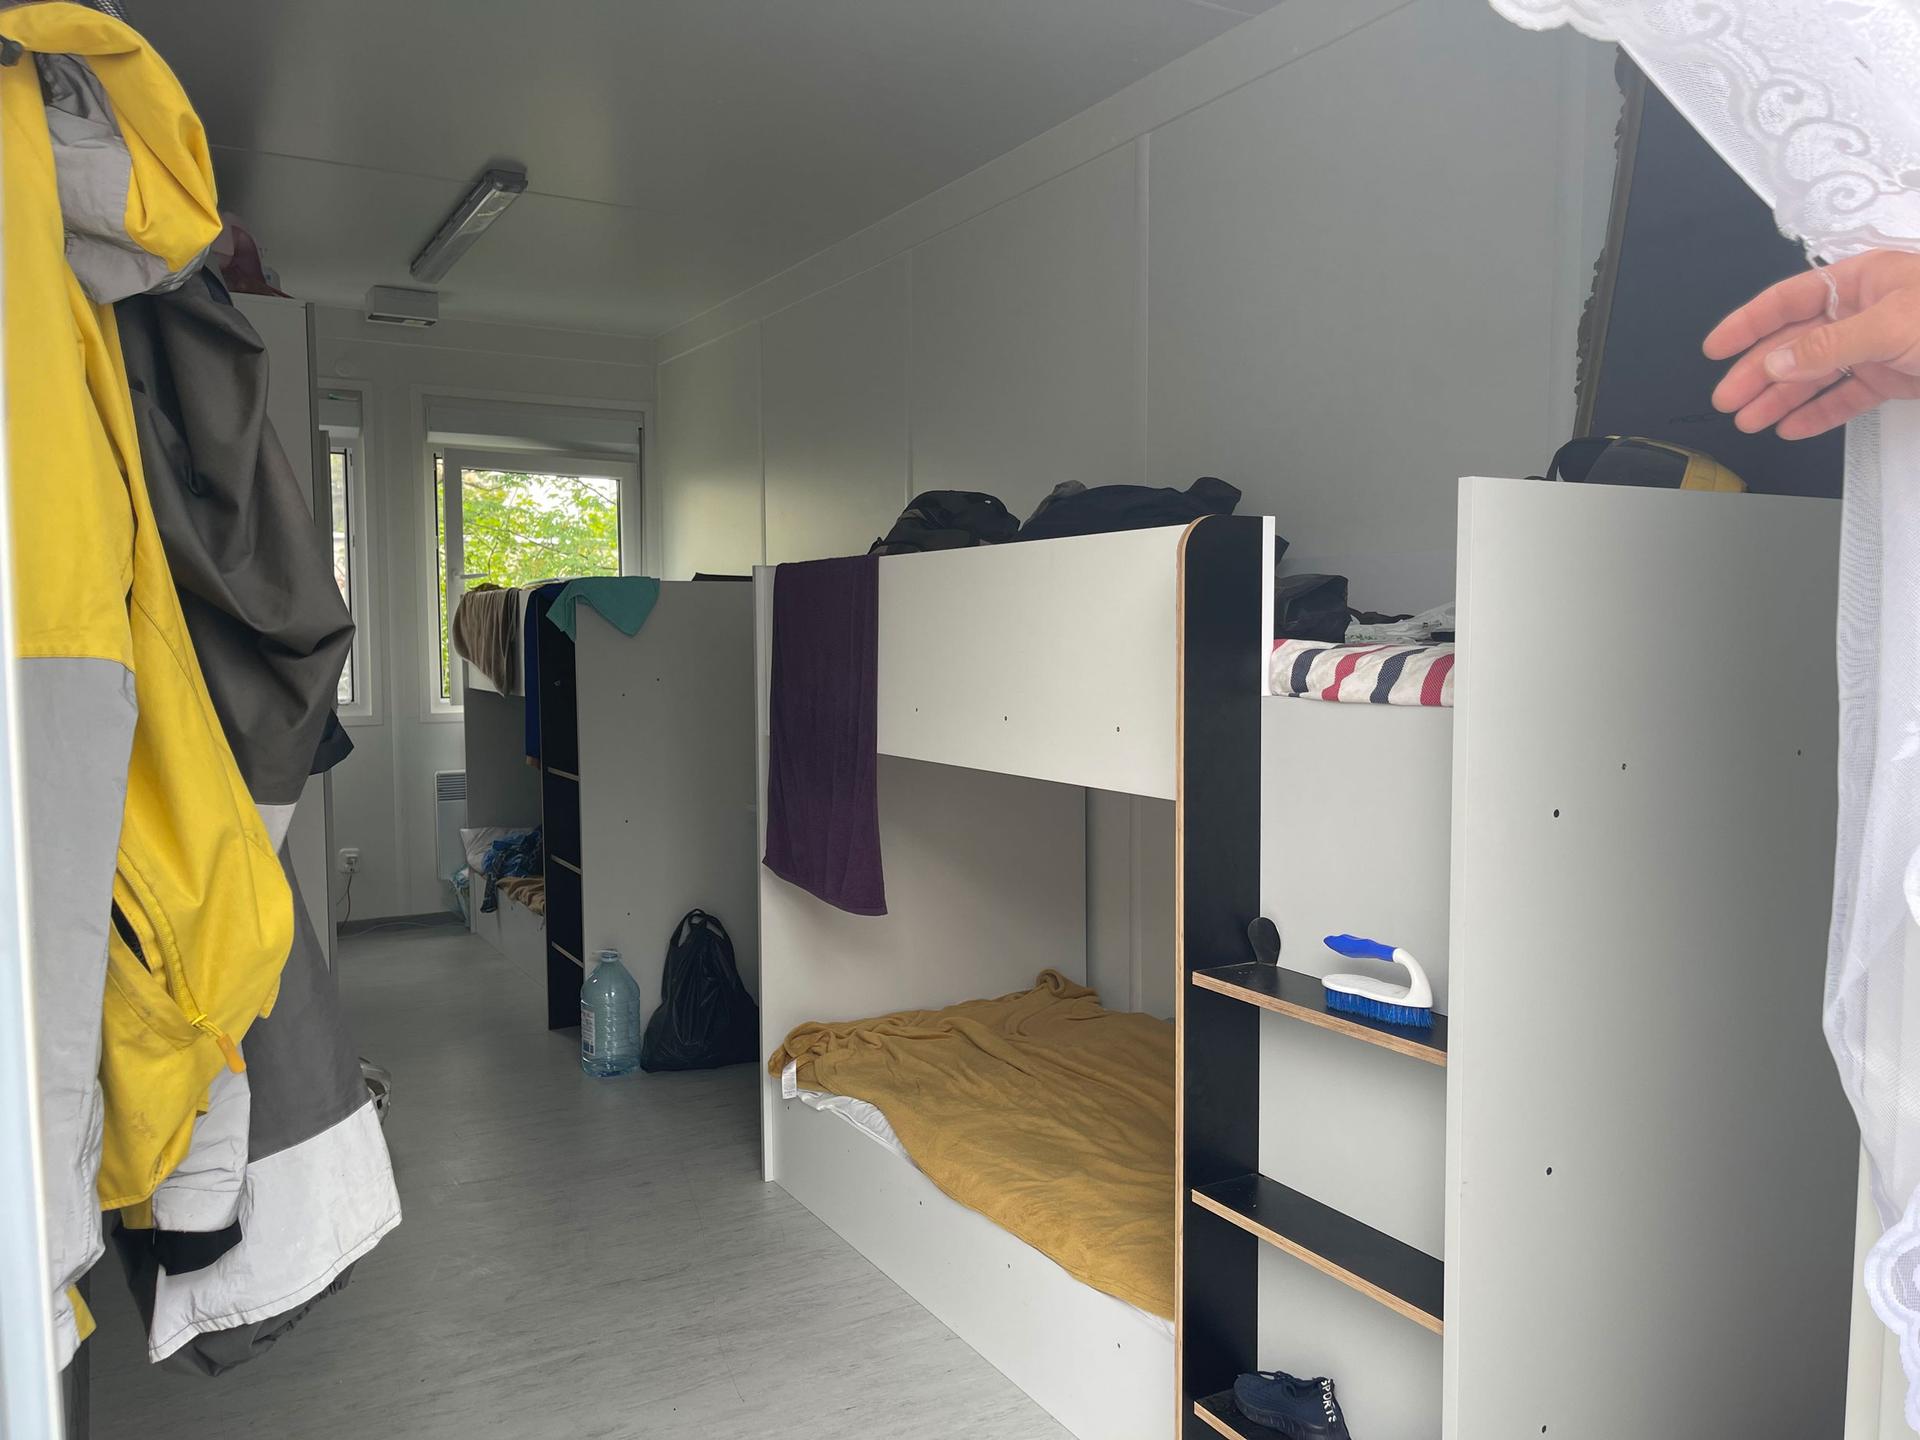 Each module is 130-square feet and includes four beds, shelves and a place to hang clothes.